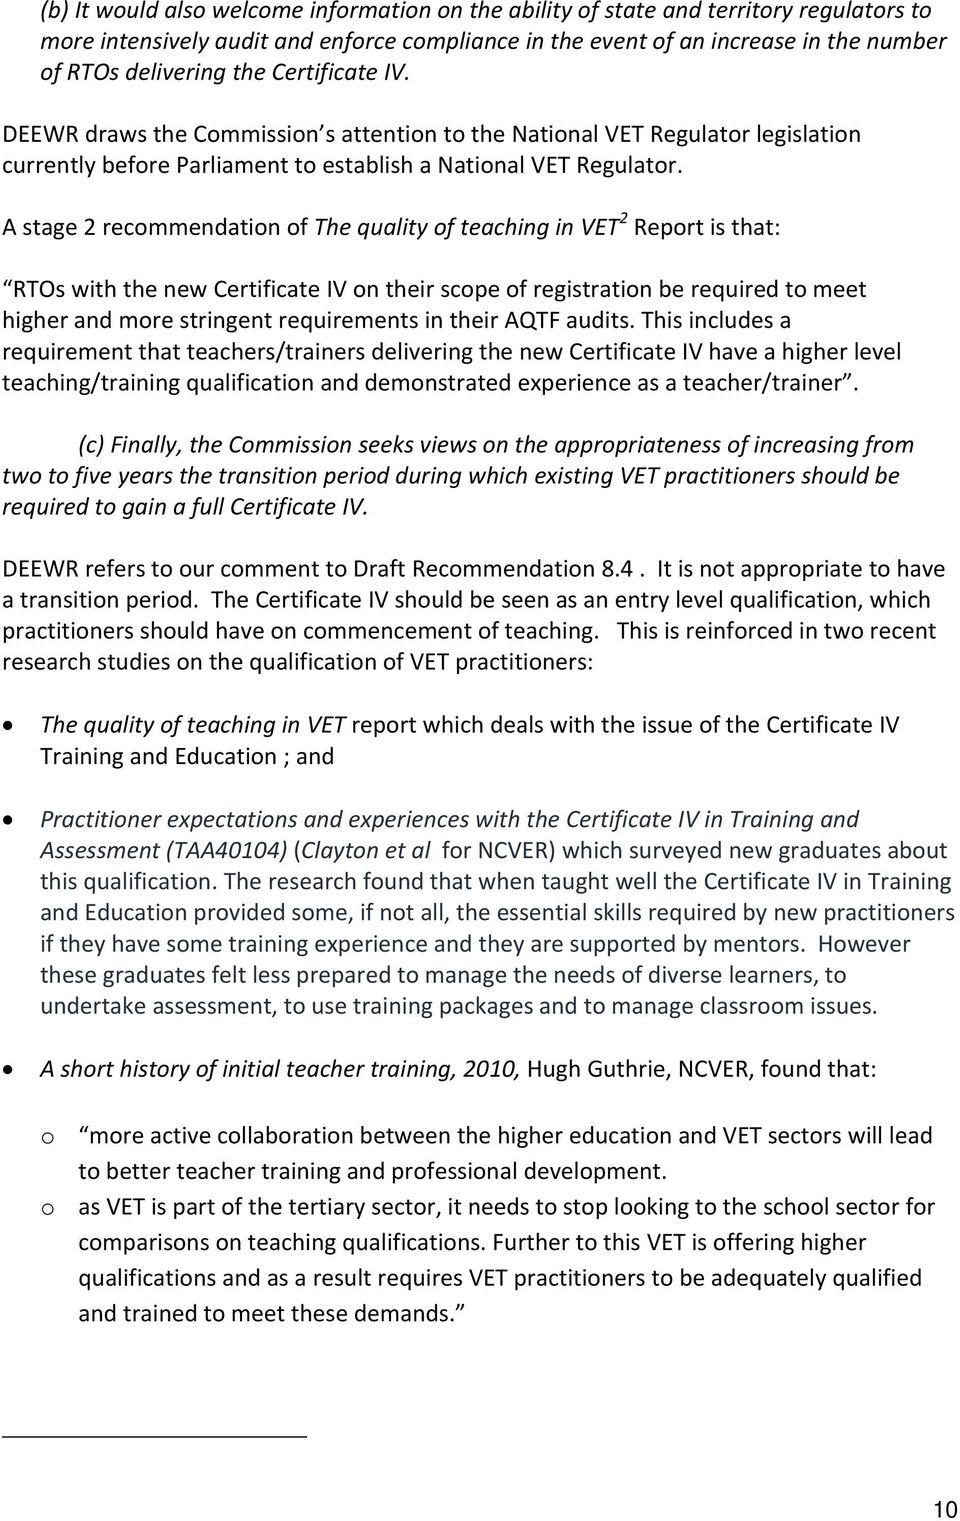 A stage 2 recommendation of The quality of teaching in VET 2 Report is that: RTOs with the new Certificate IV on their scope of registration be required to meet higher and more stringent requirements